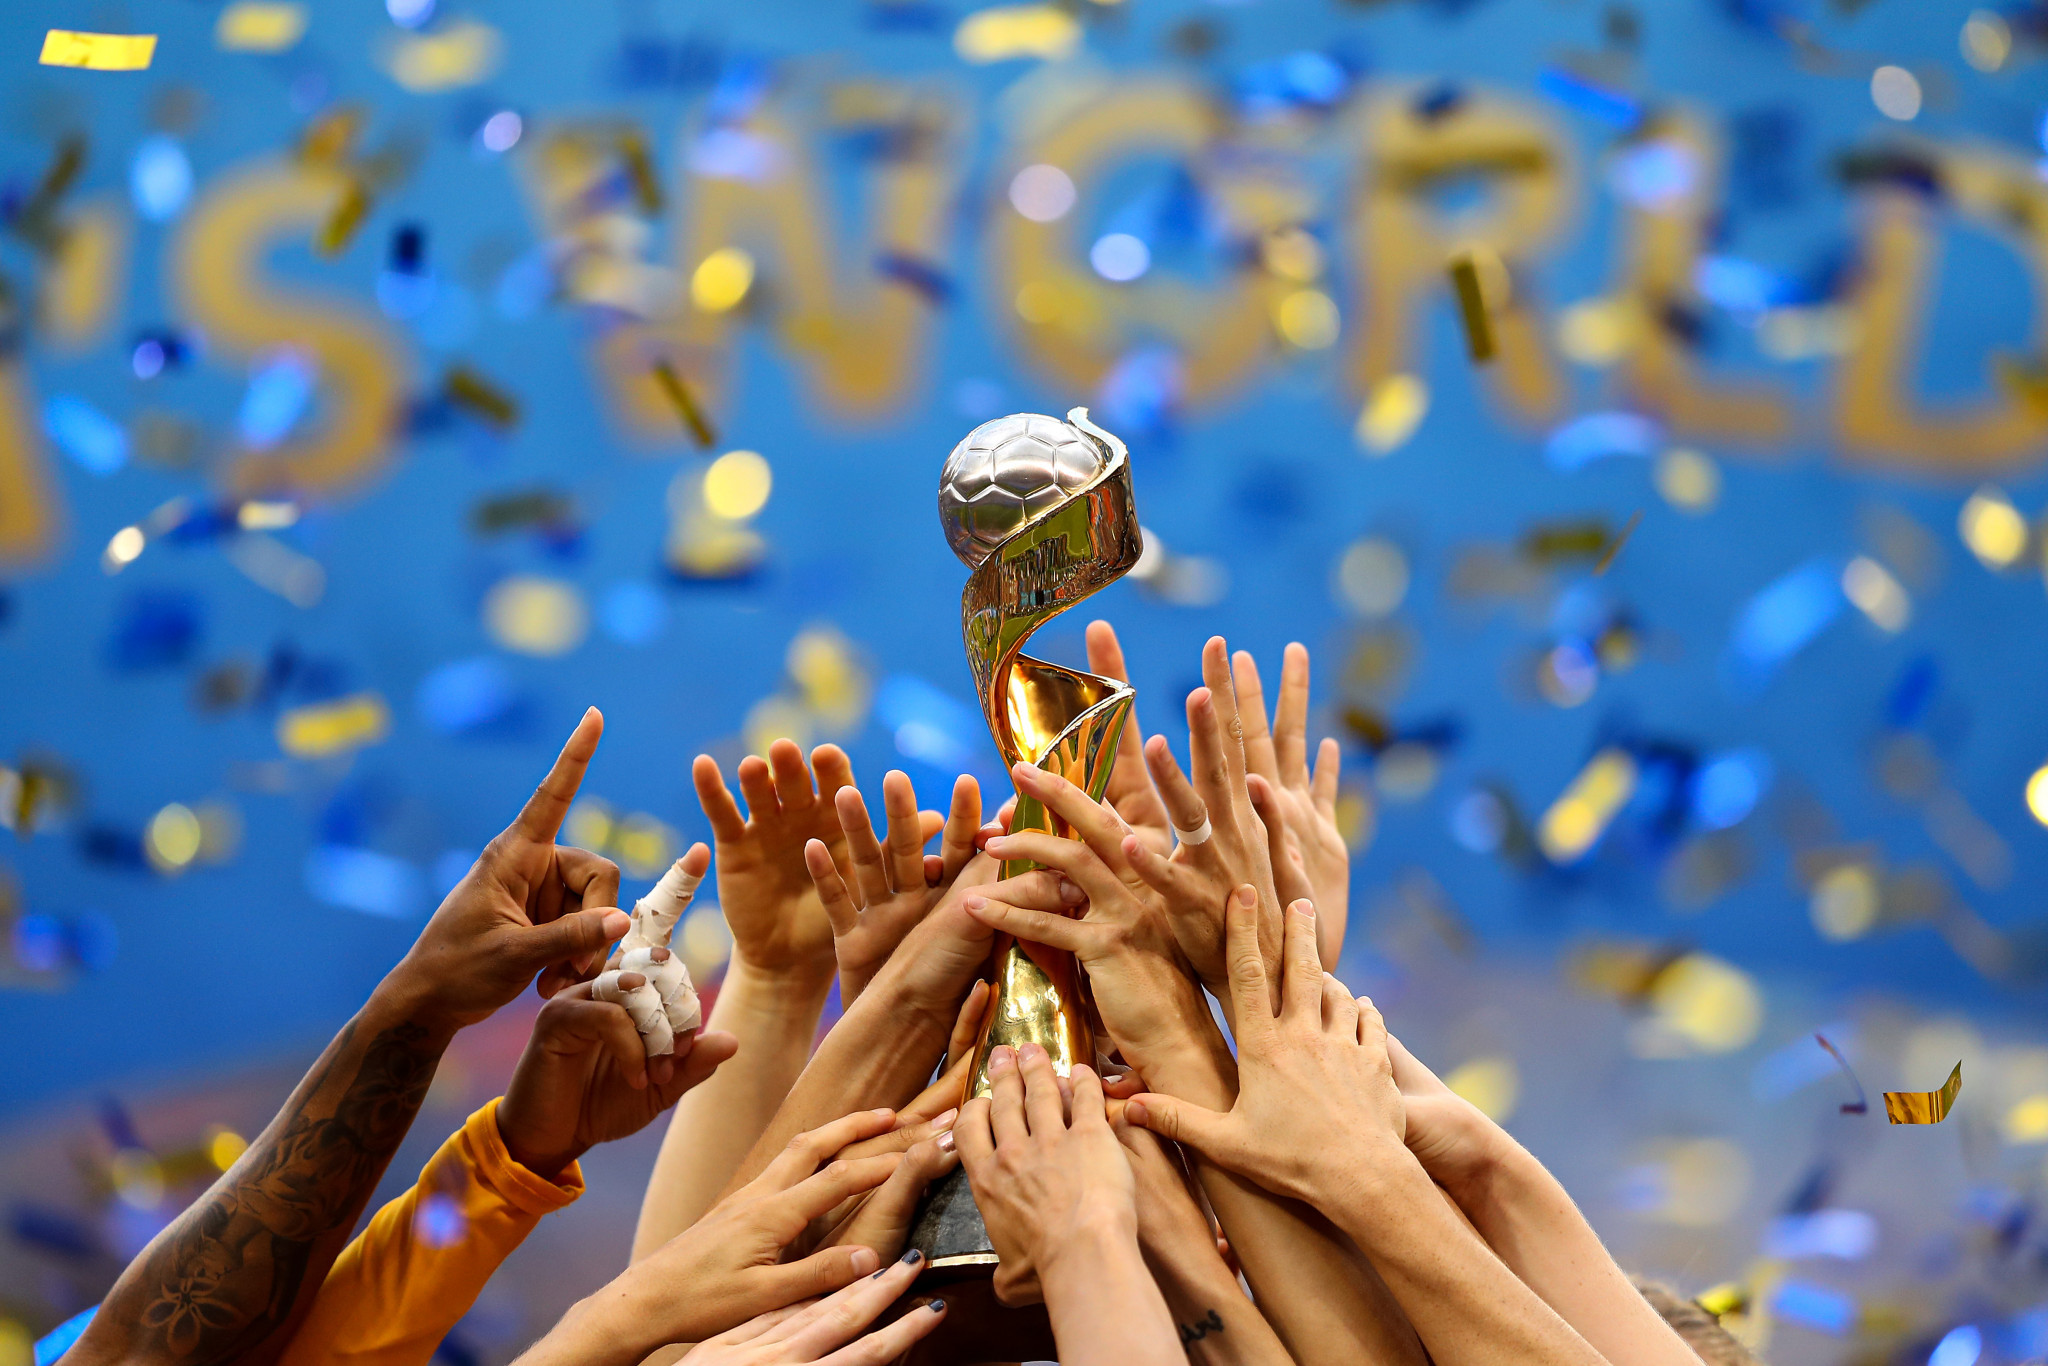 Australia and Brazil have confirmed their respective bids for the 2023 Women's World Cup are unaffected by the expansion of the tournament ©Getty Images